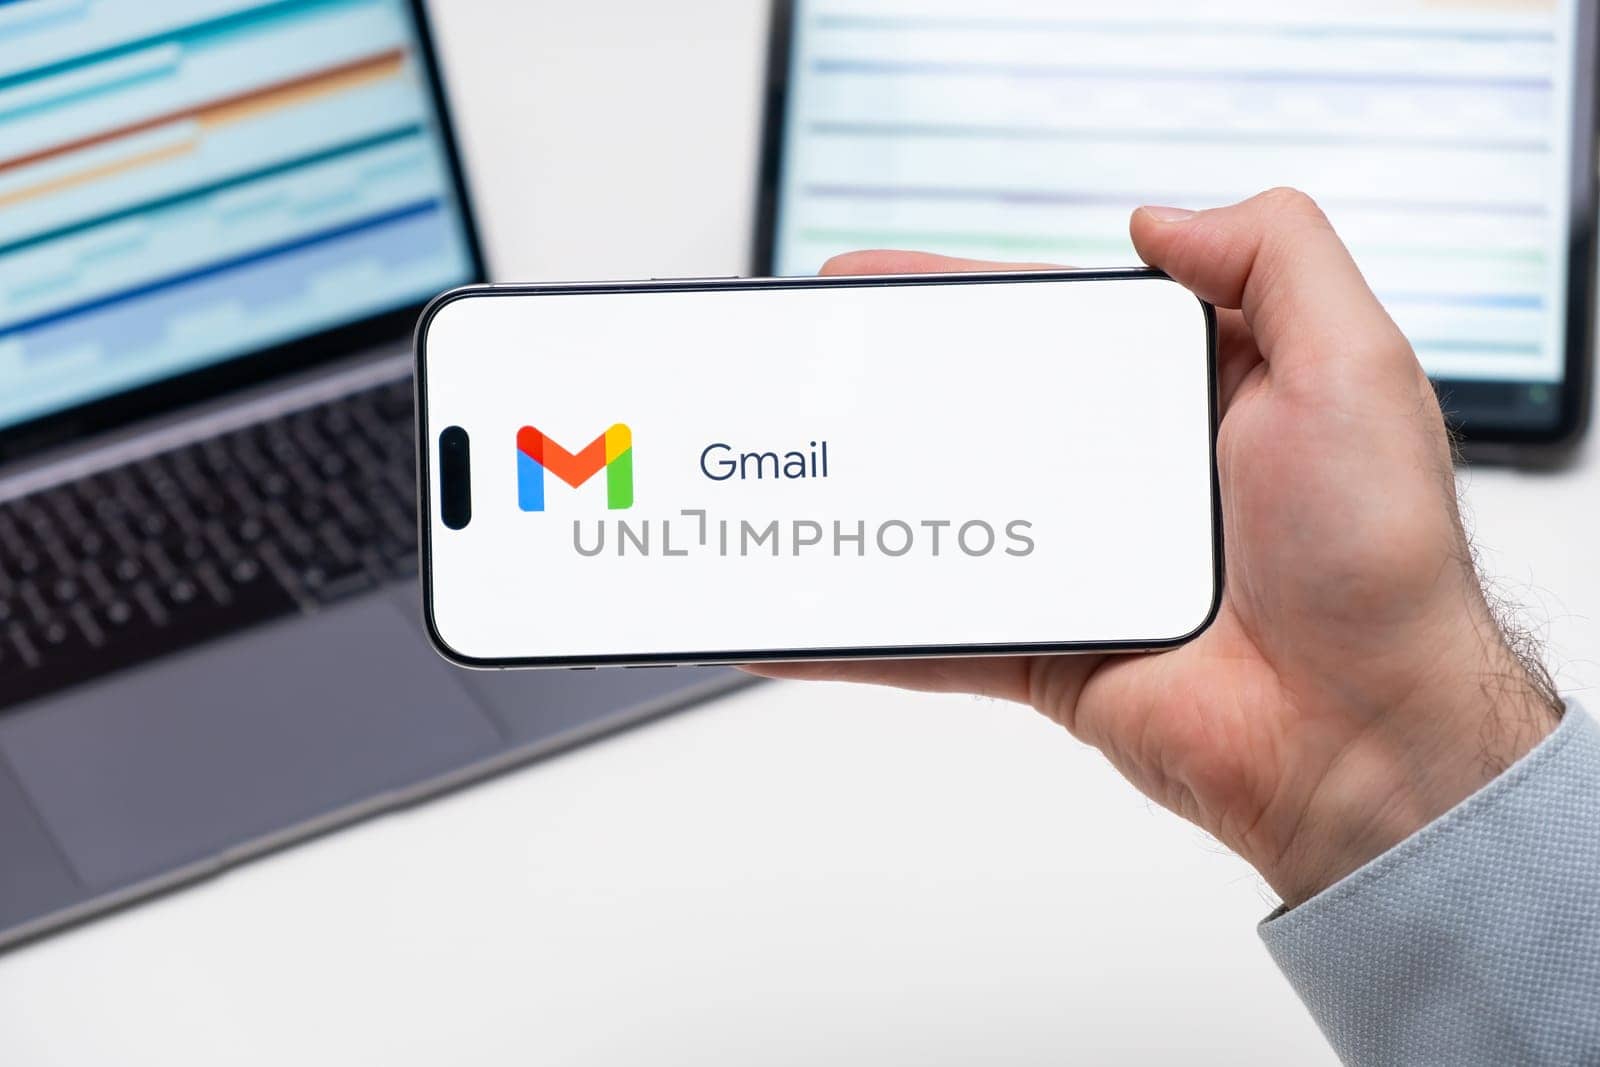 Gmail application logo on the screen of smart phone in mans hand, laptop and tablet are on the table in the background, December 2023, Prague, Czech Republic.